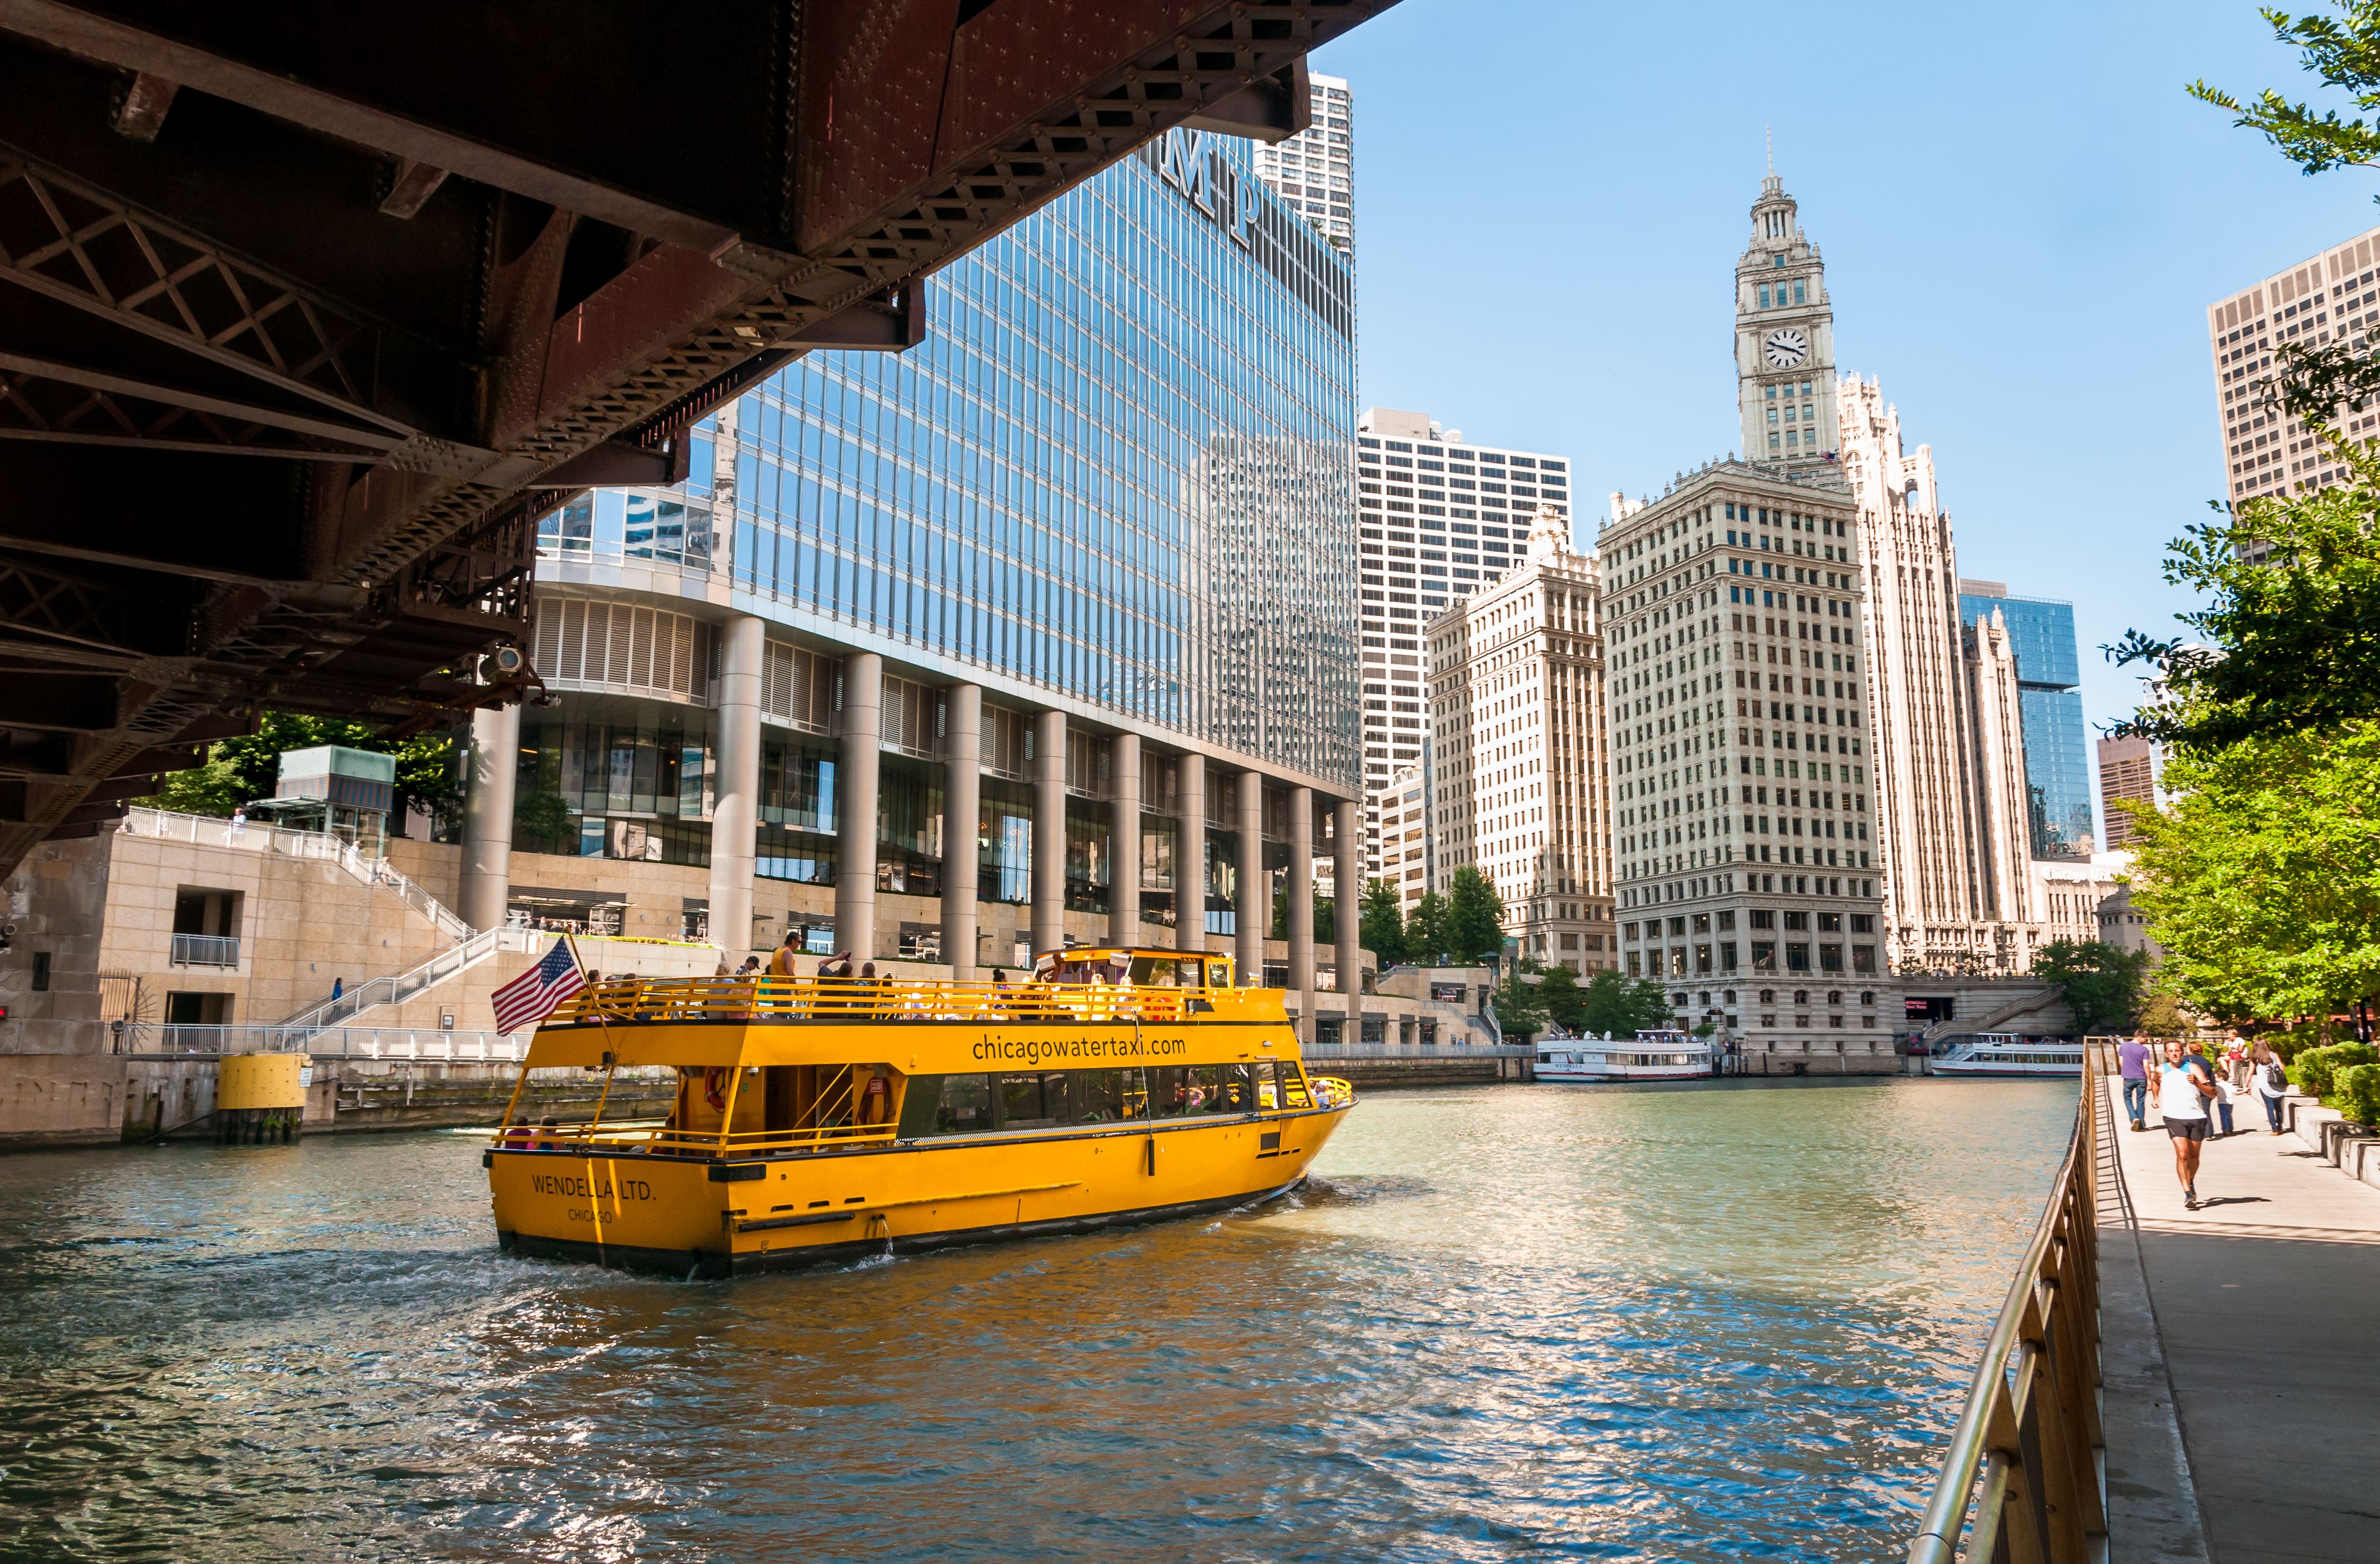 A bright yellow, two-deck boat passes below a bridge on an urban river. A glassy blue skyscraper is visible on the far bank and a pedestrian filled riverwalk on the near side.